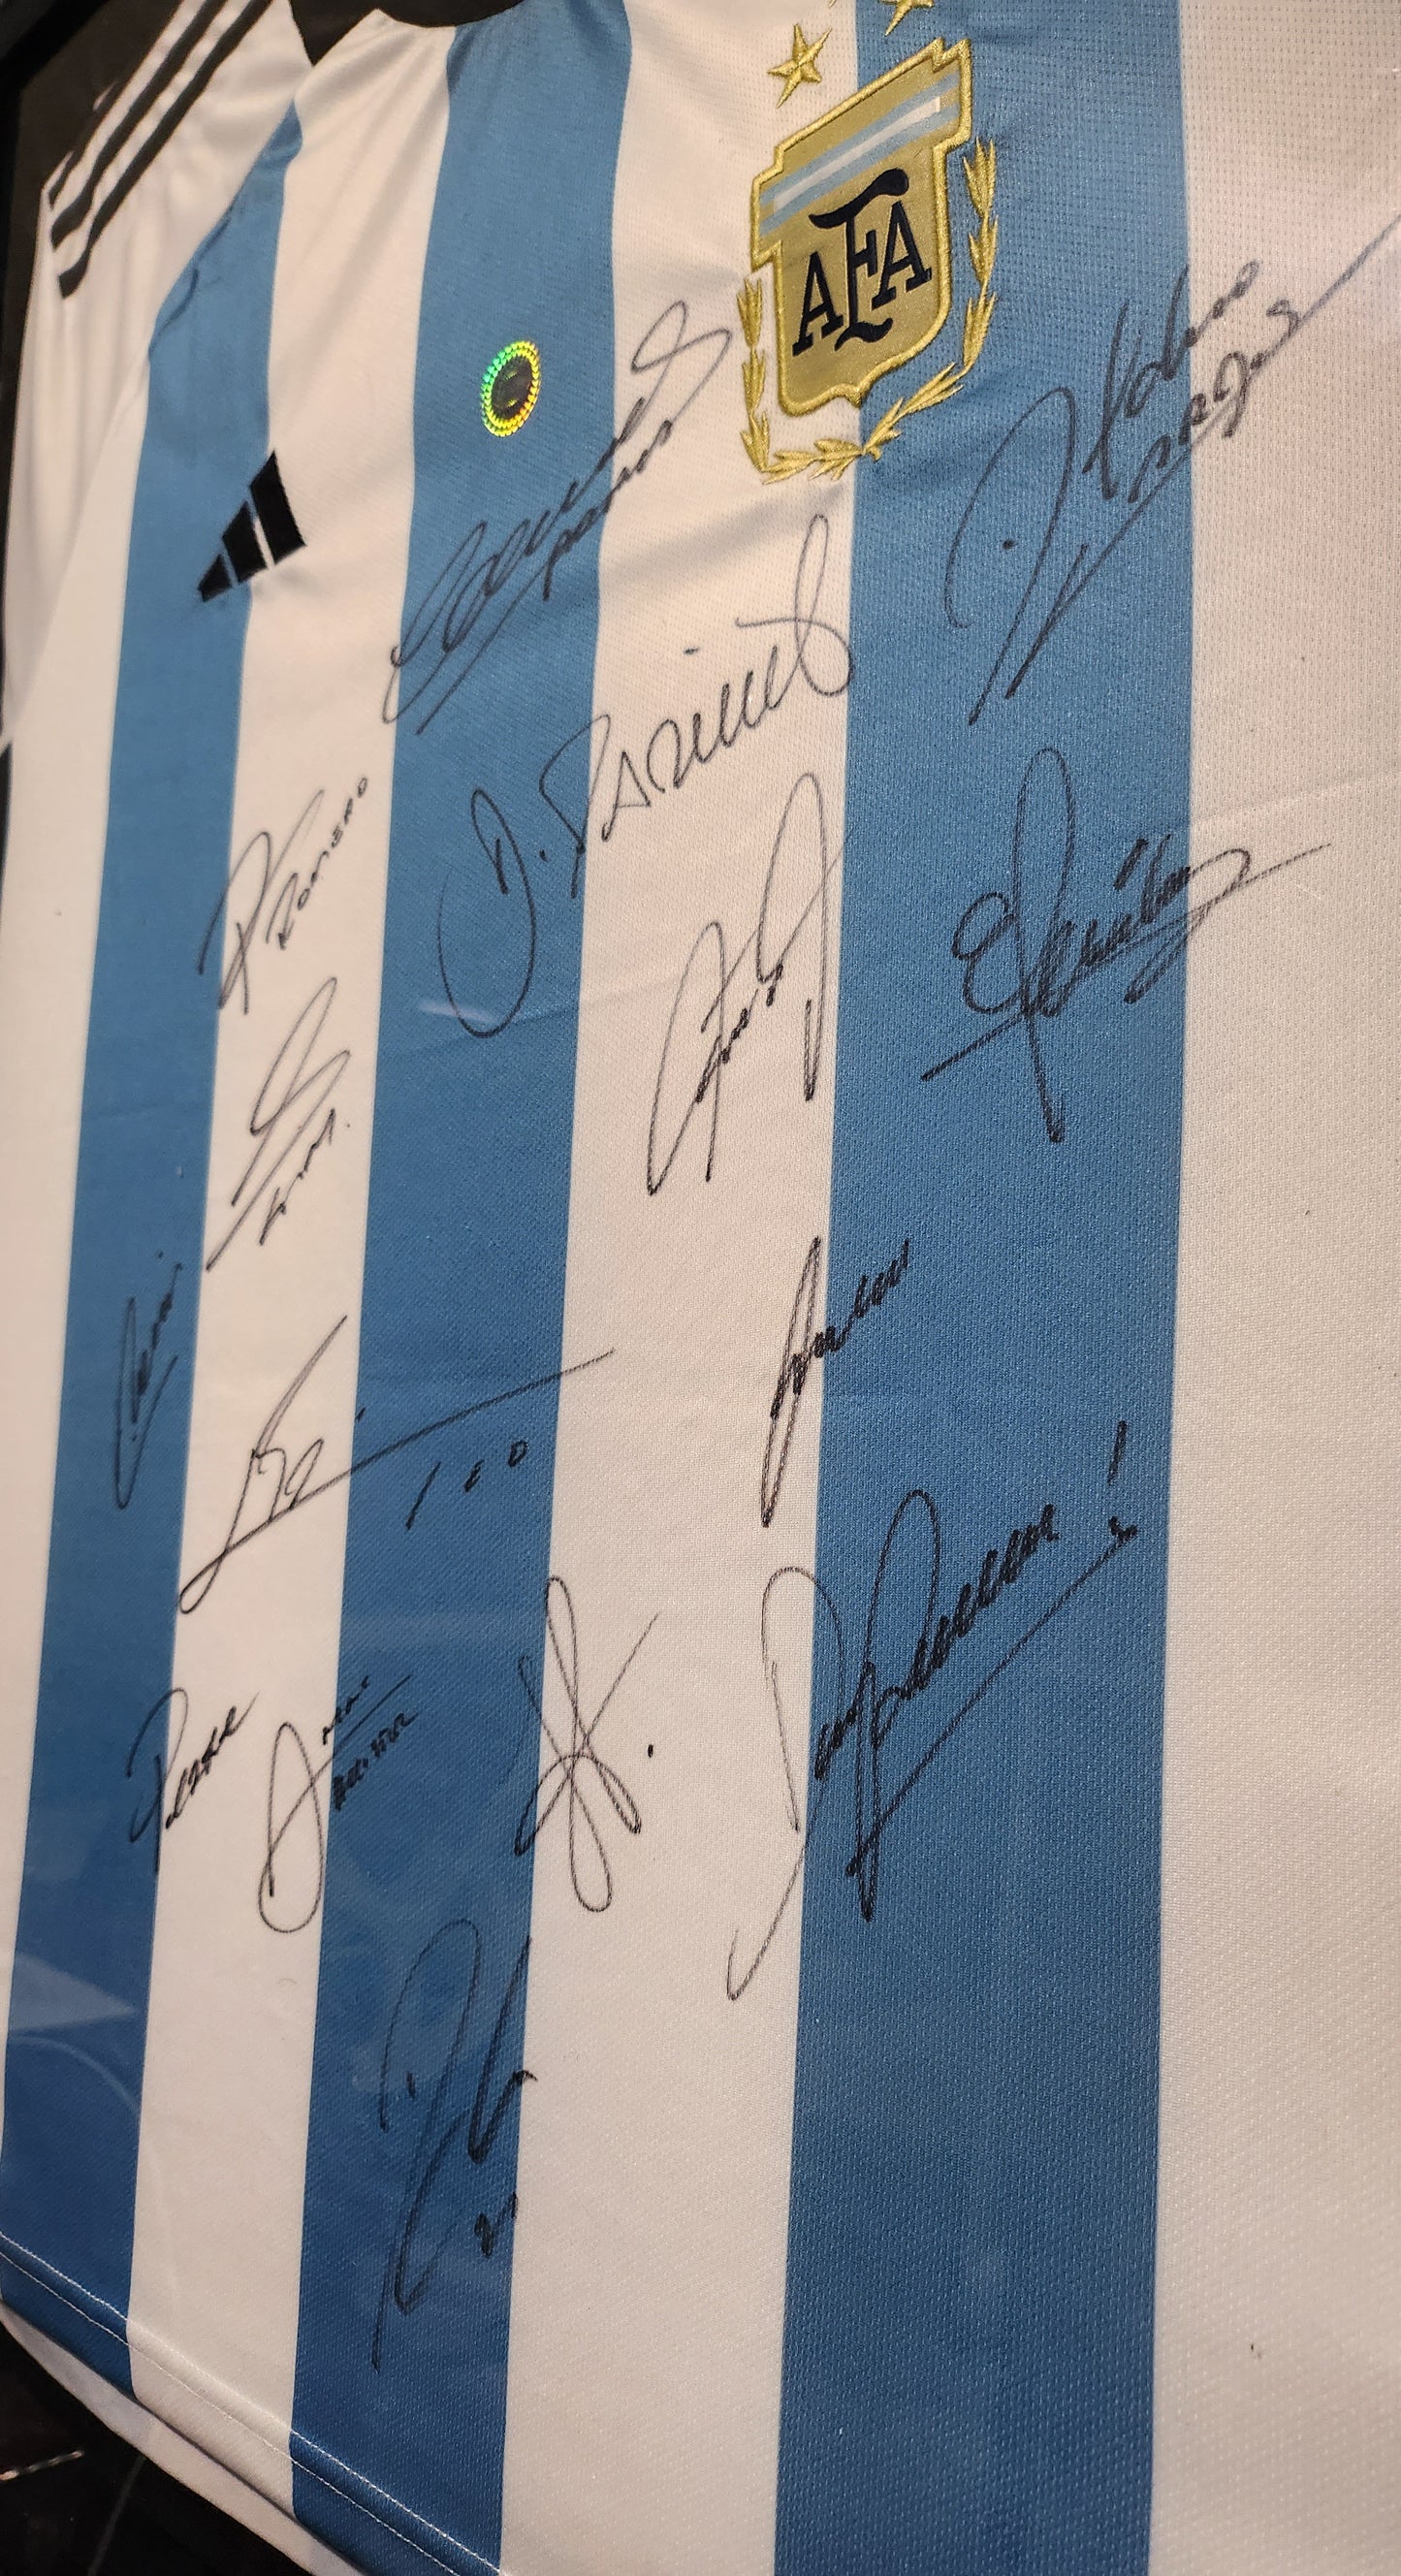 Argentina 2022 World Champions signed Jersey - Messi and 14 more!